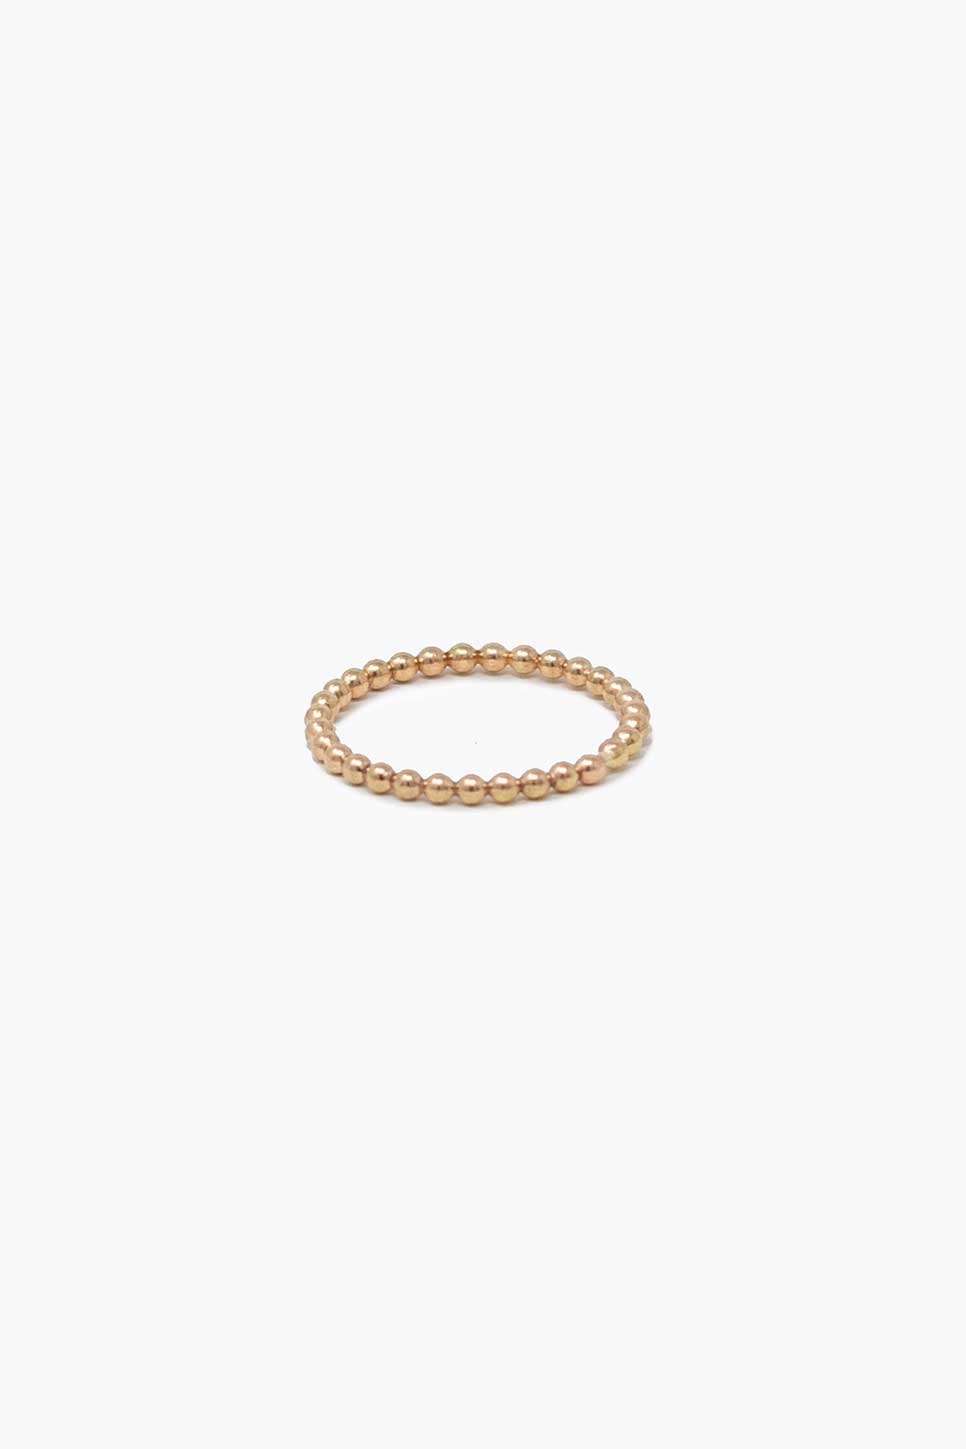 Able - Caesar Ring - Gold